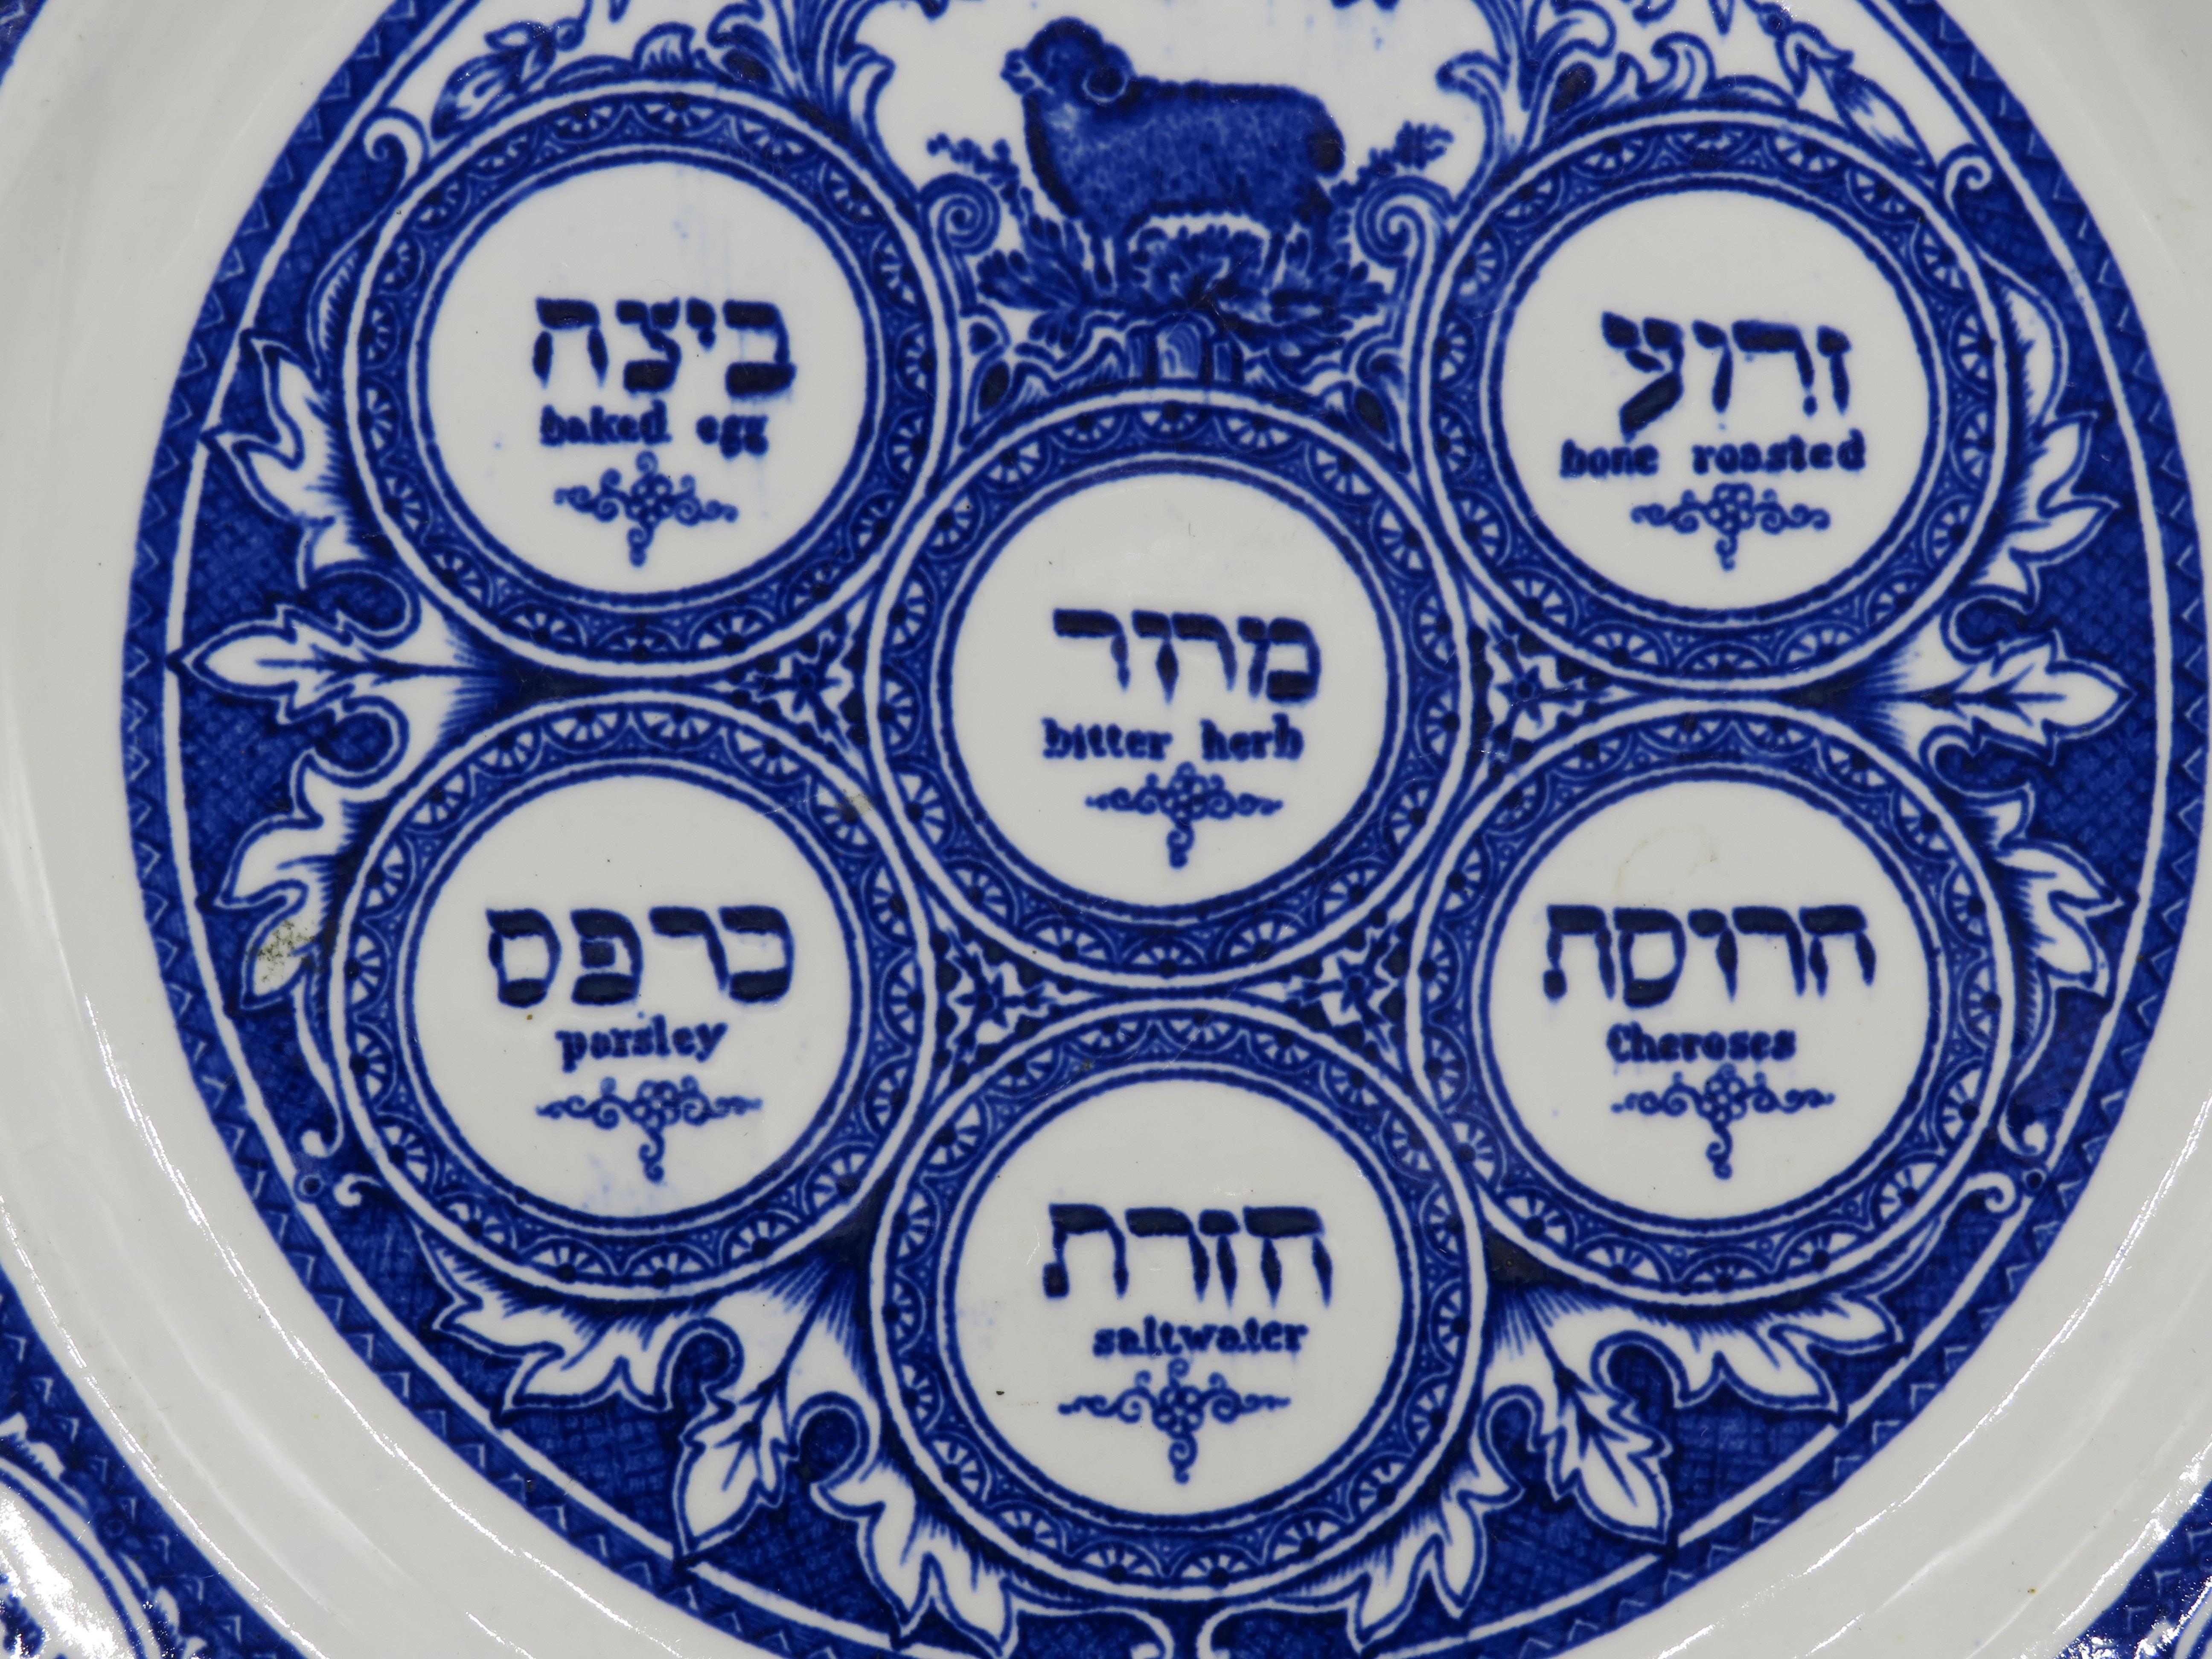 Blue and white pottery Passover plate, by Ridgeways, Staffordshire, England, circa 1850.
In the manner of a traditional Seder plate for Pesach or Passover, decorated with the image of a pascal lamb with small reserves and text in Hebrew and